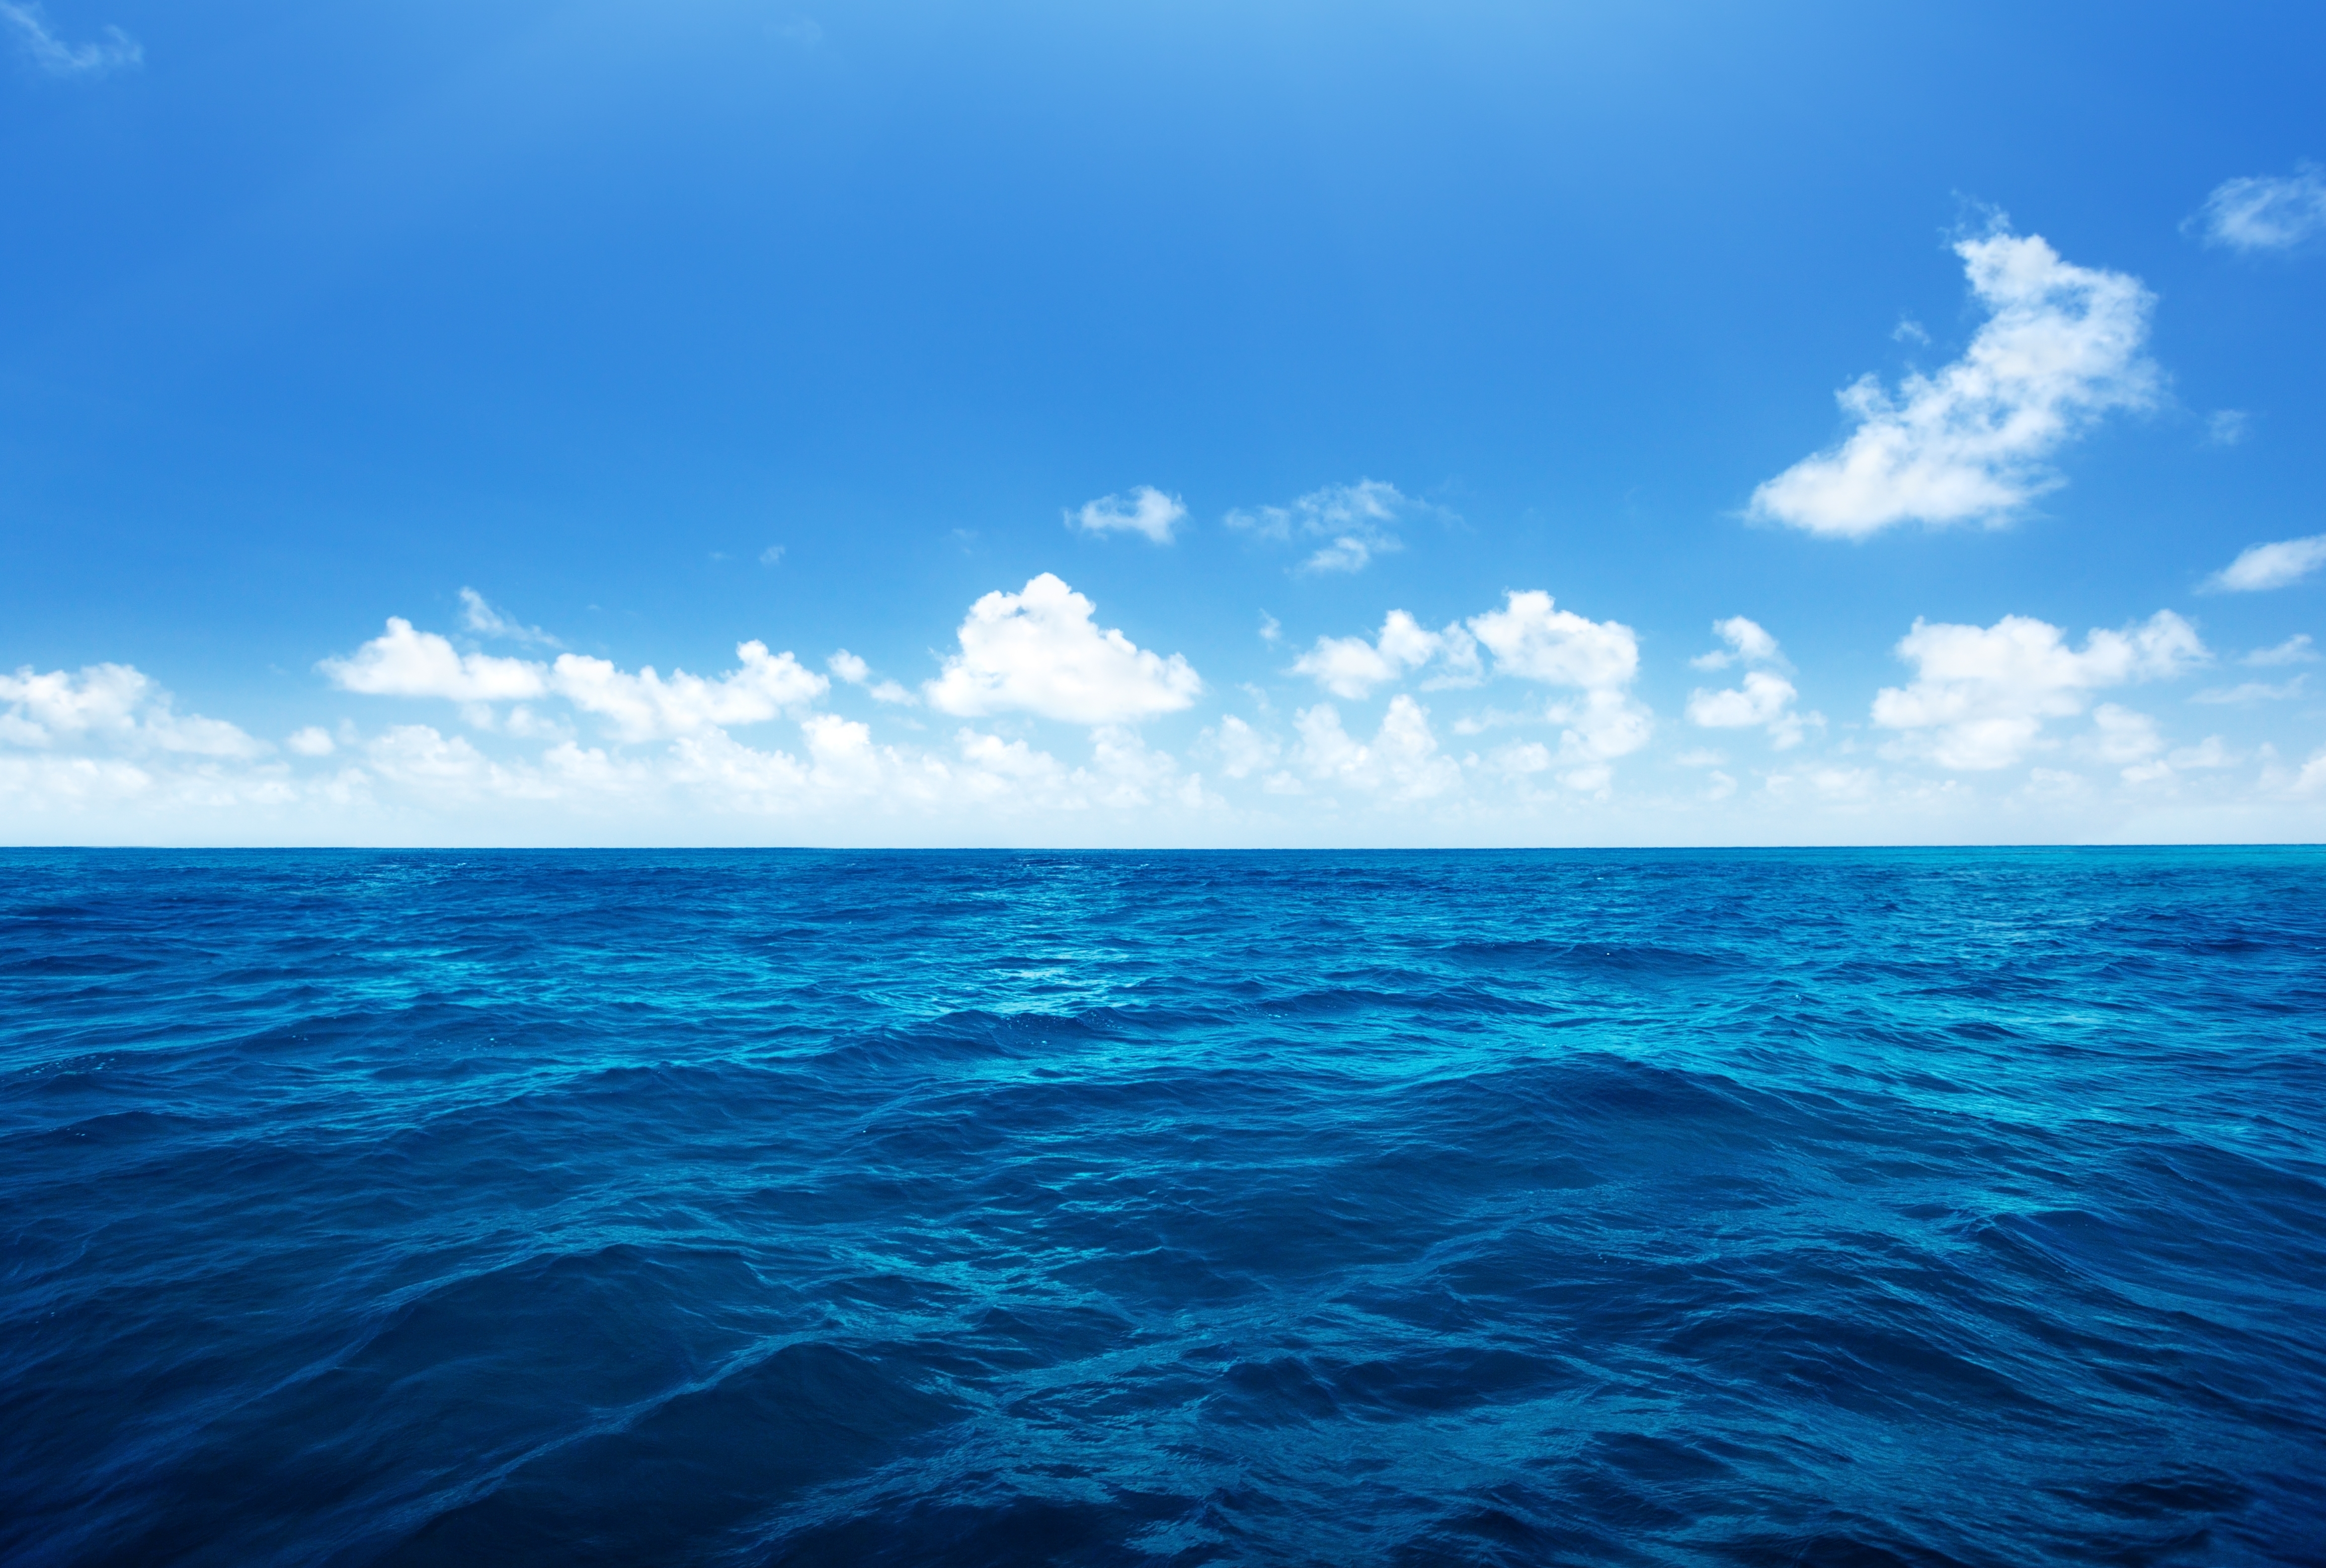 Wallpaper Blue Ocean Under Blue Sky and White Clouds During Daytime  Background  Download Free Image